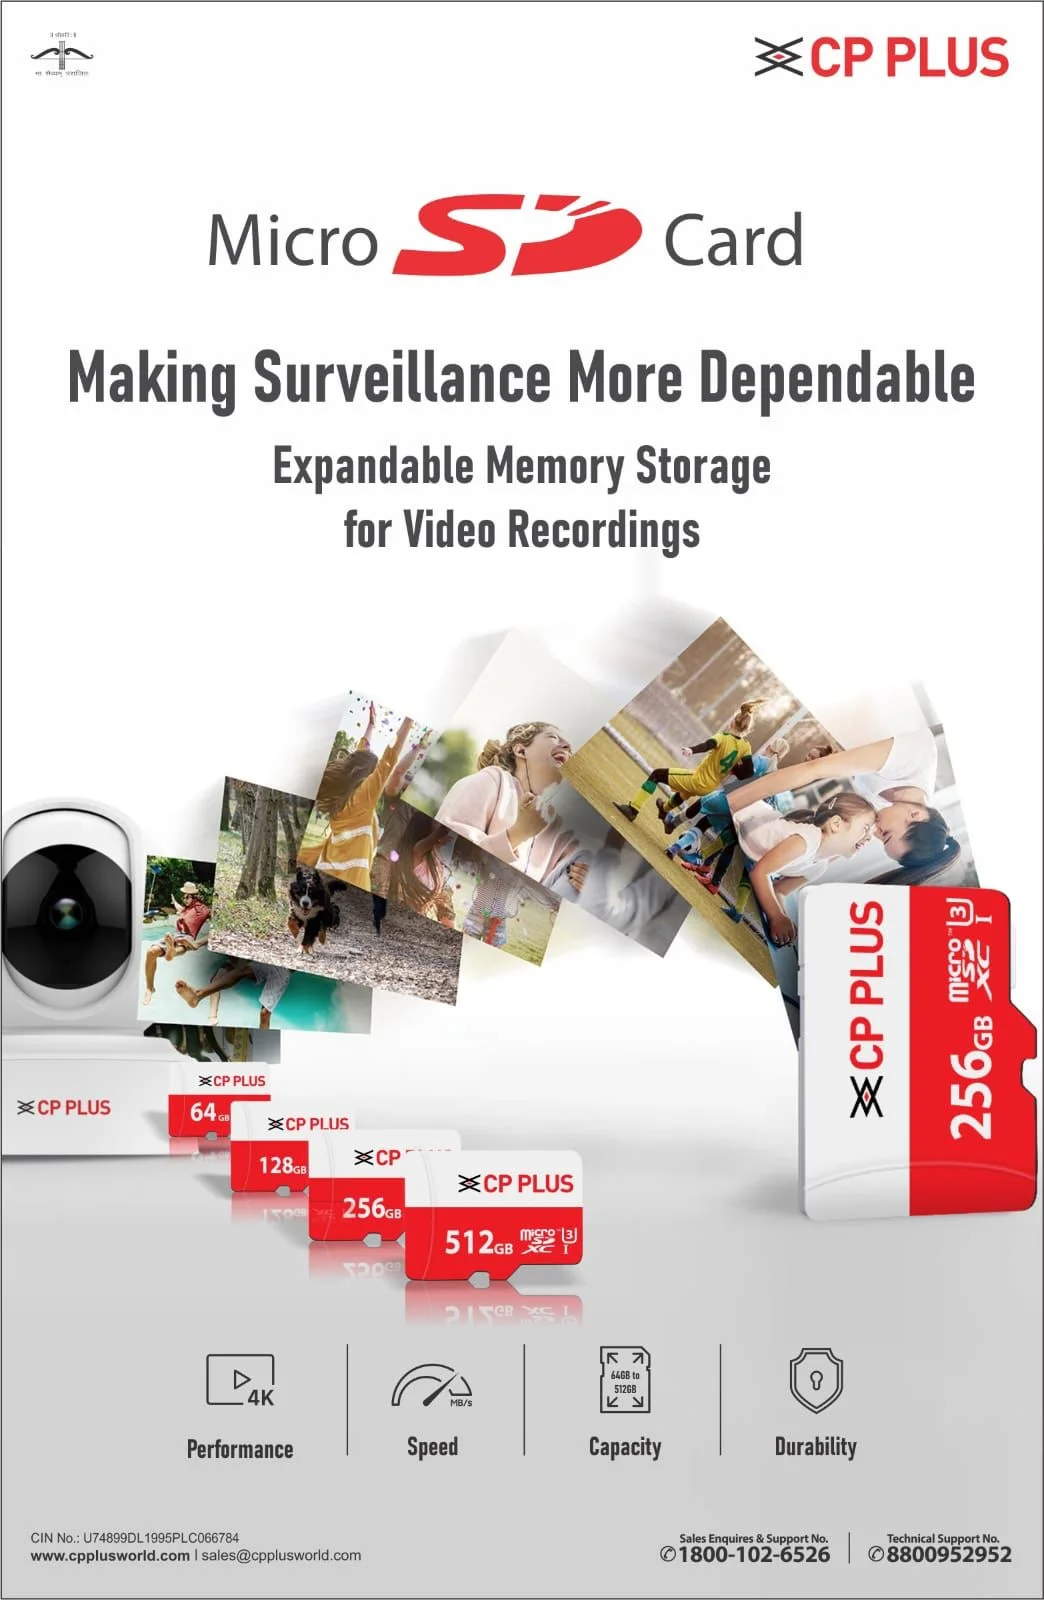 CP Plus Micro SD Card- Making Surveillance more Dependable!!!